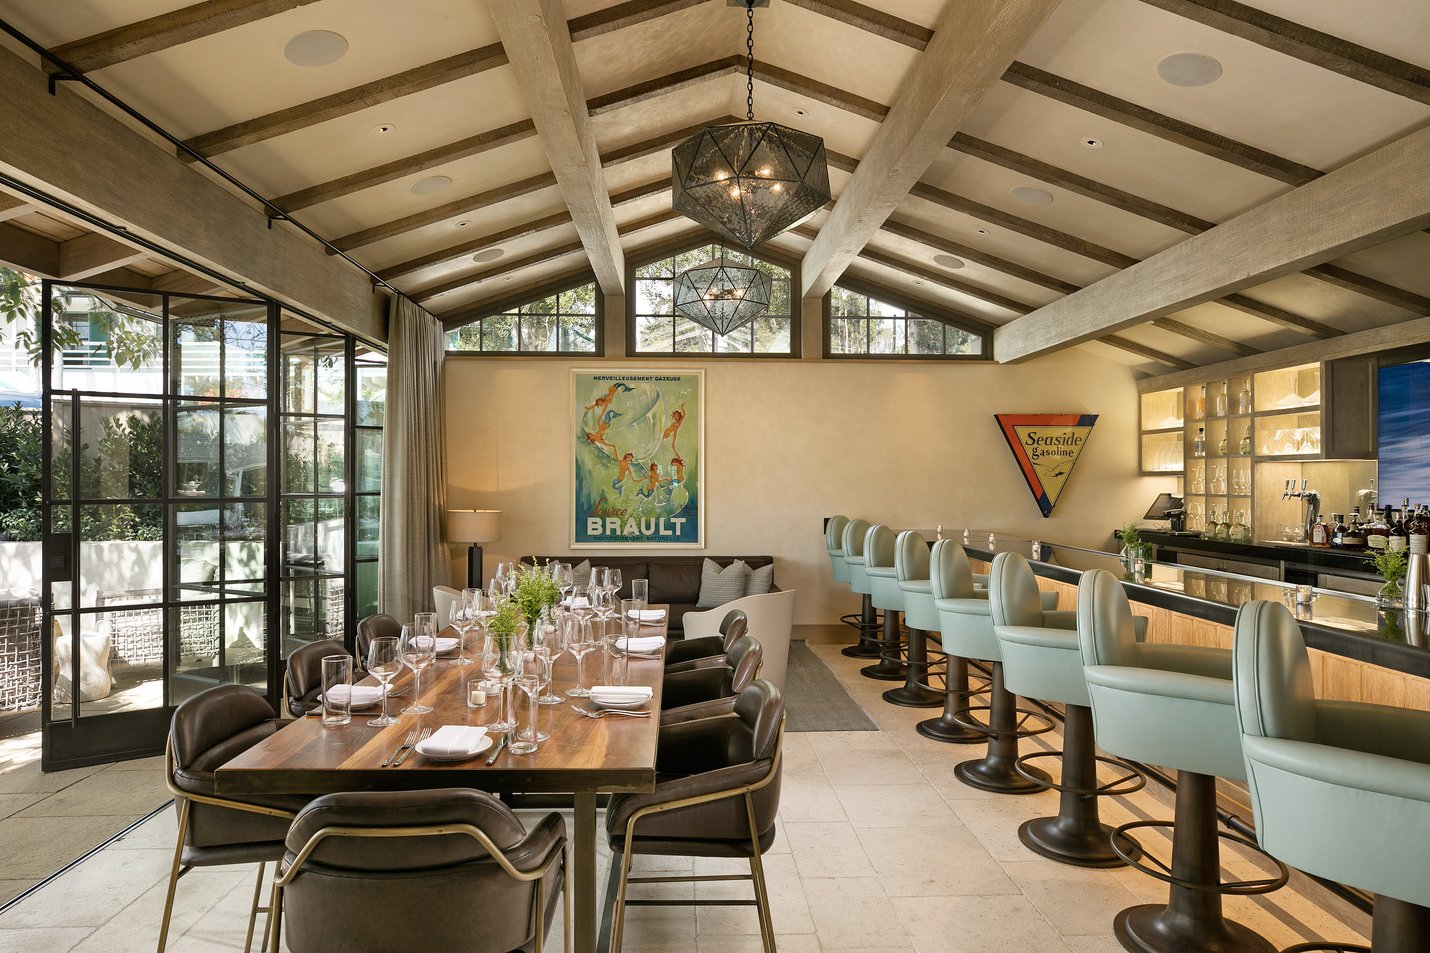 We Want More - Oliver's Restaurant in Montecito